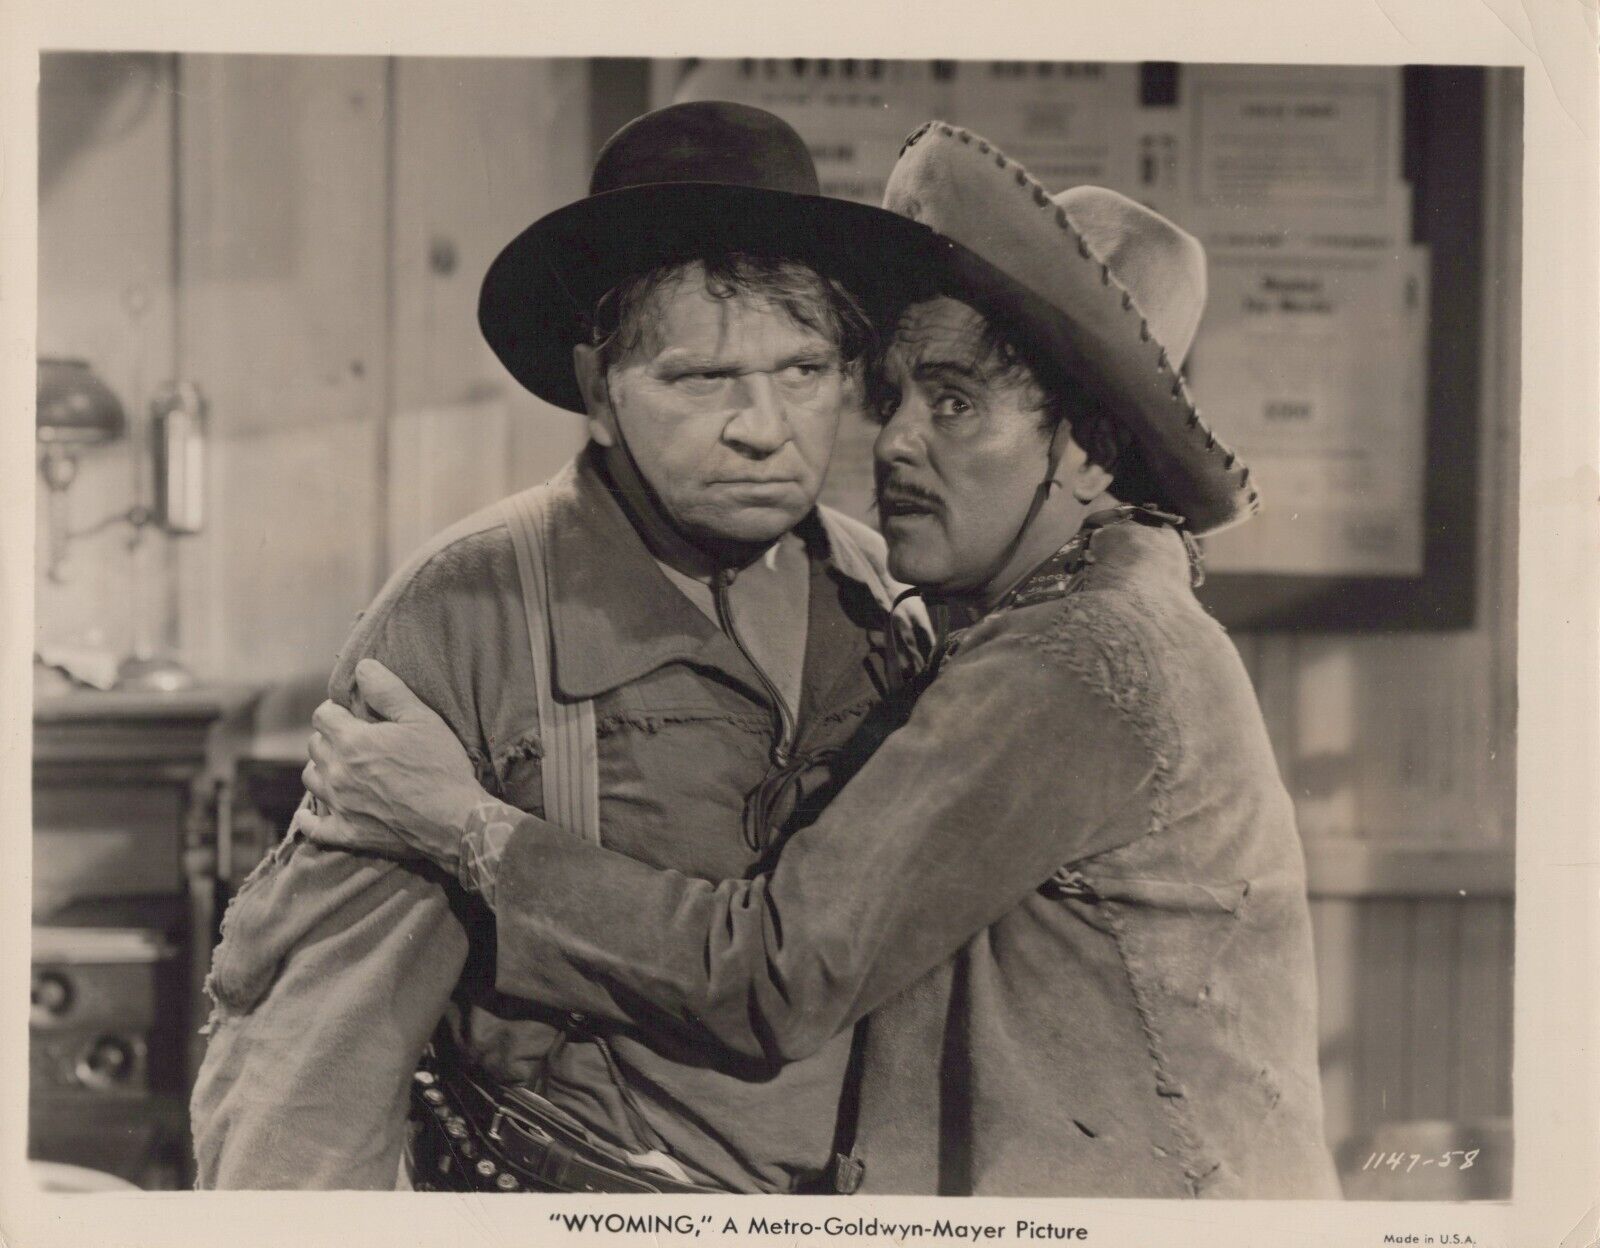 Wallace Beery + Leo Carrillo in Wyoming (1940) ❤ Original Vintage Photo K 373